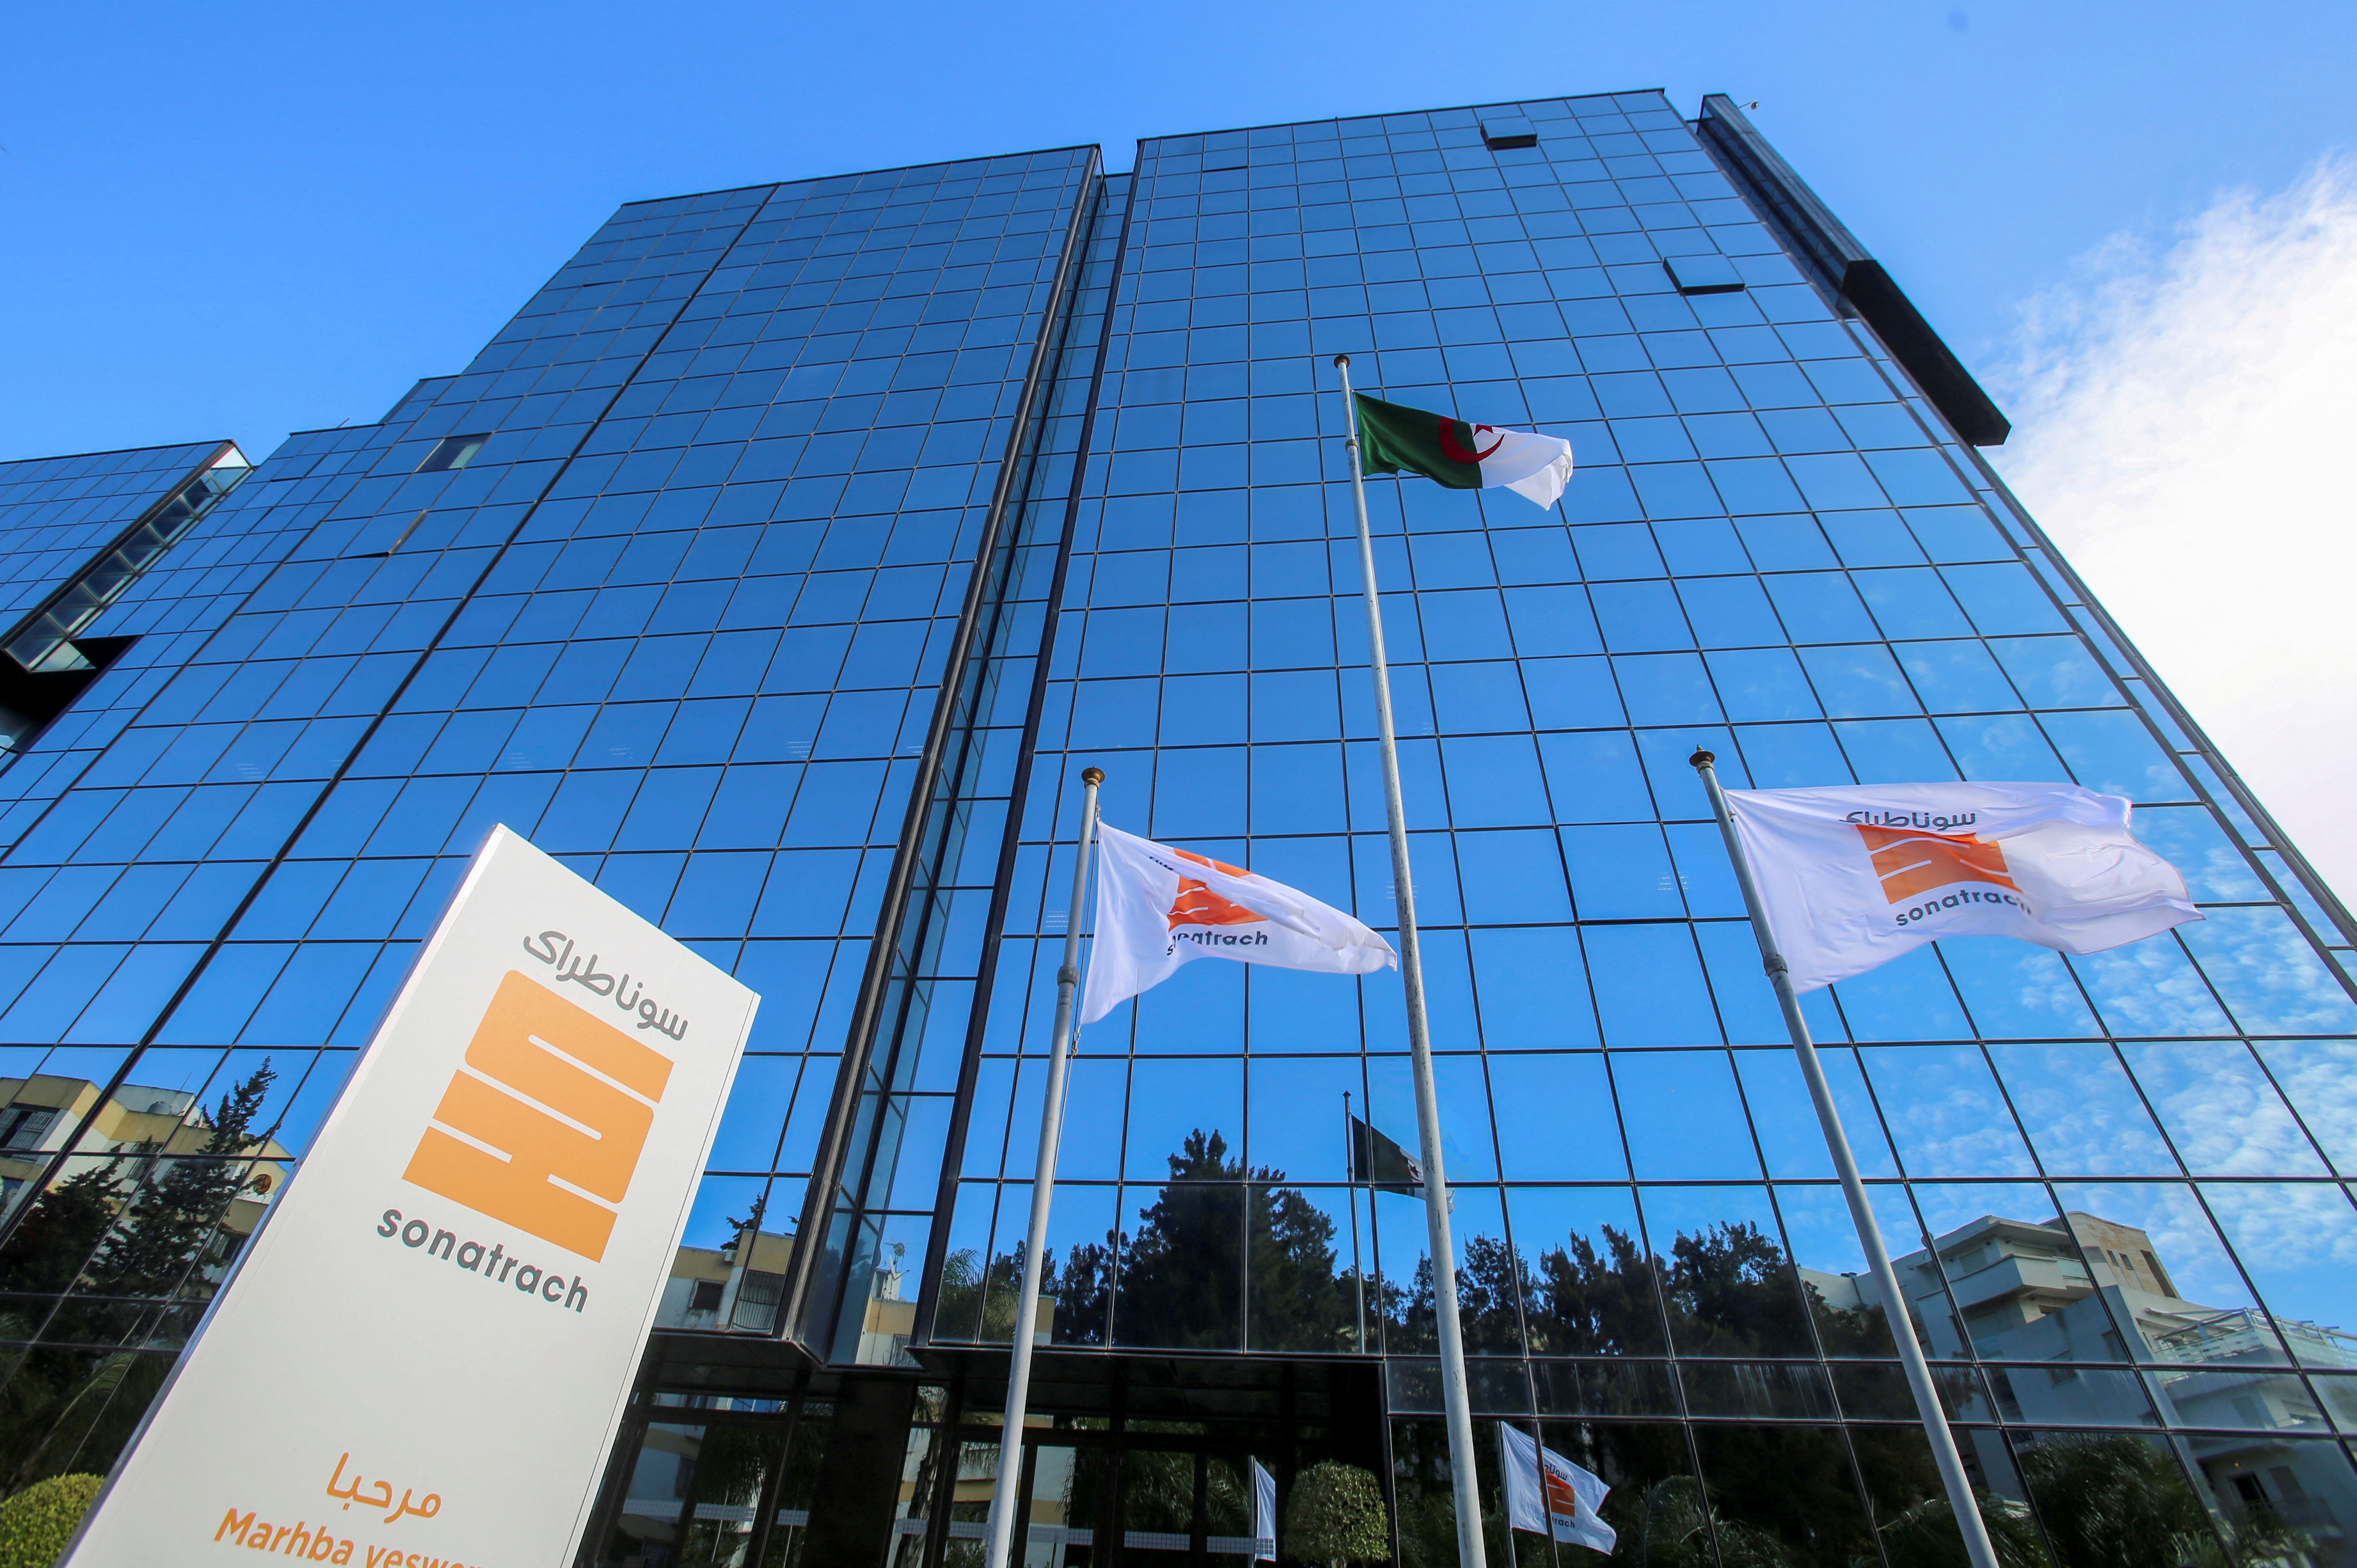 A view of the headquarters of the state energy company Sonatrach in Algiers